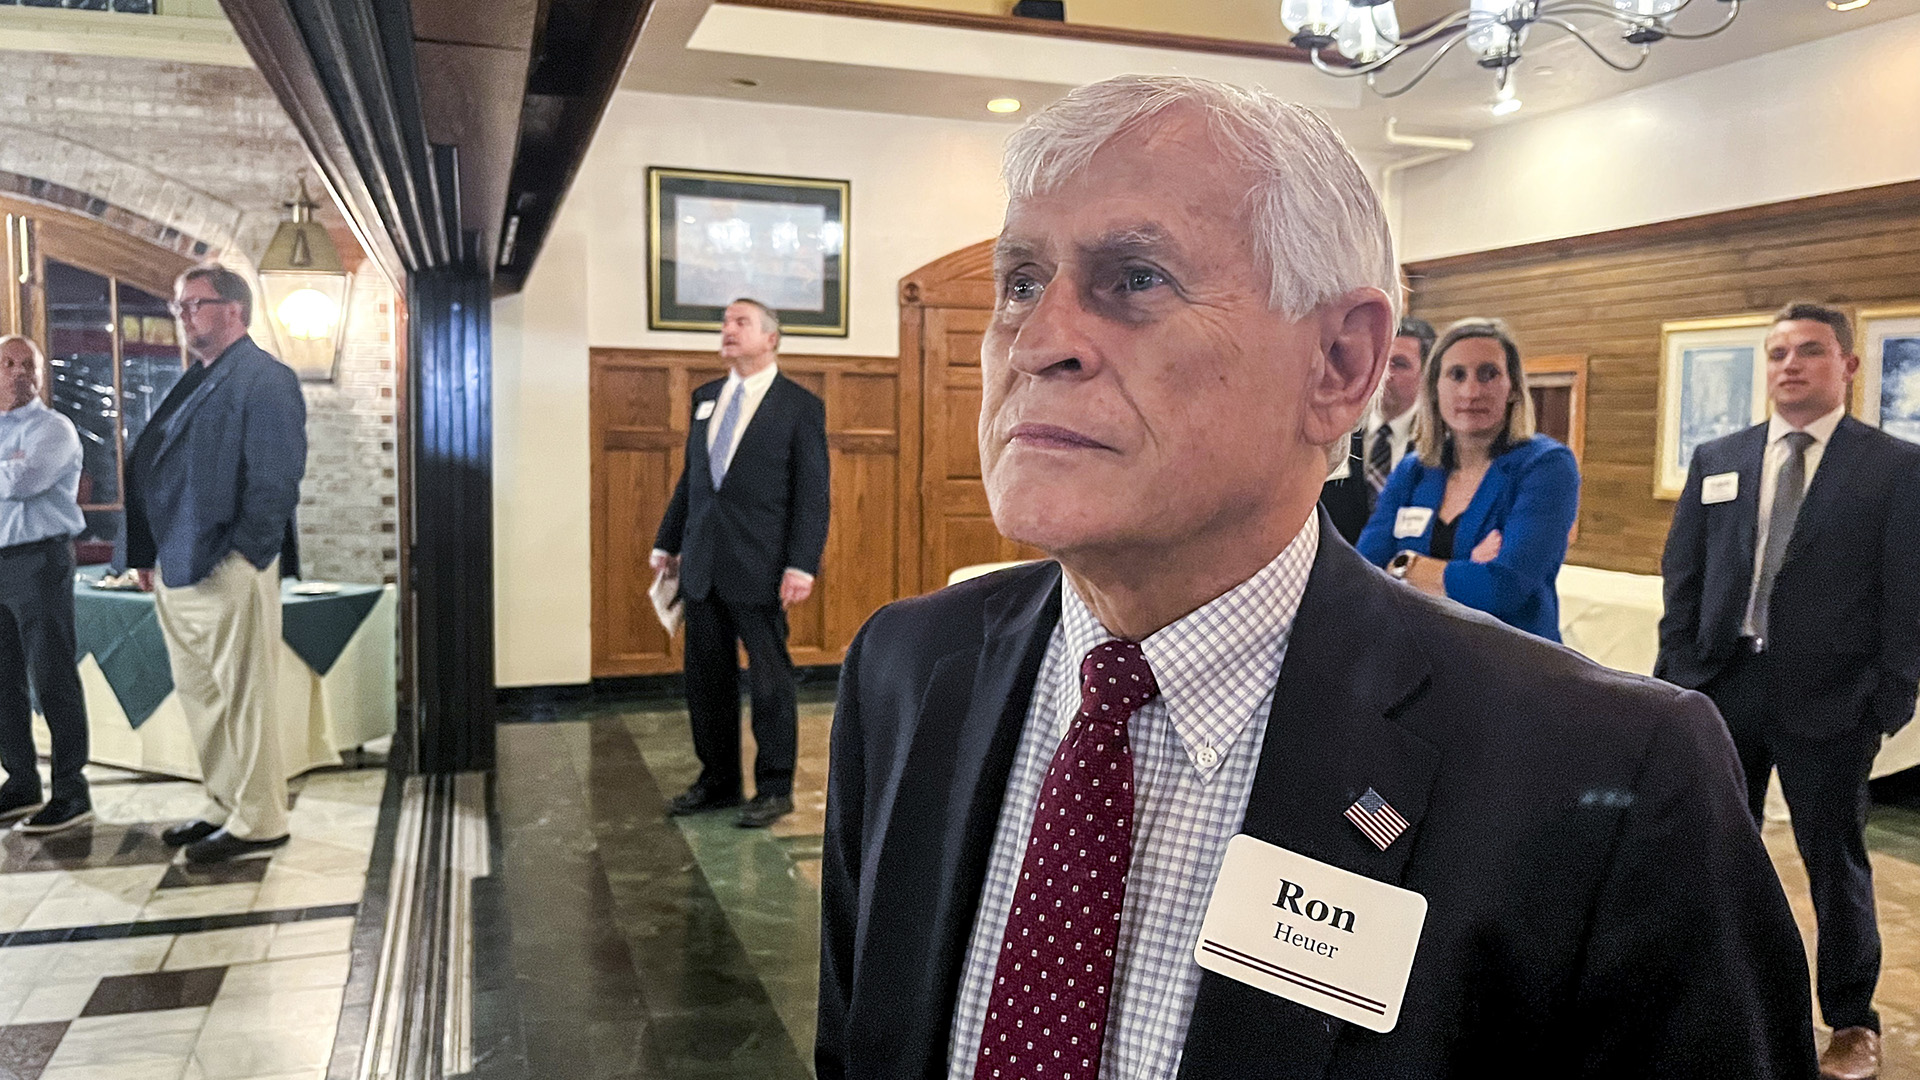 Ron Heuer stands while wearing a U.S. flag lapel pin and nametag reading "Ron Heuer" in a room with marble-patterned flooring and segments of wood-paneled walls, with other people in business attire standing in the background.